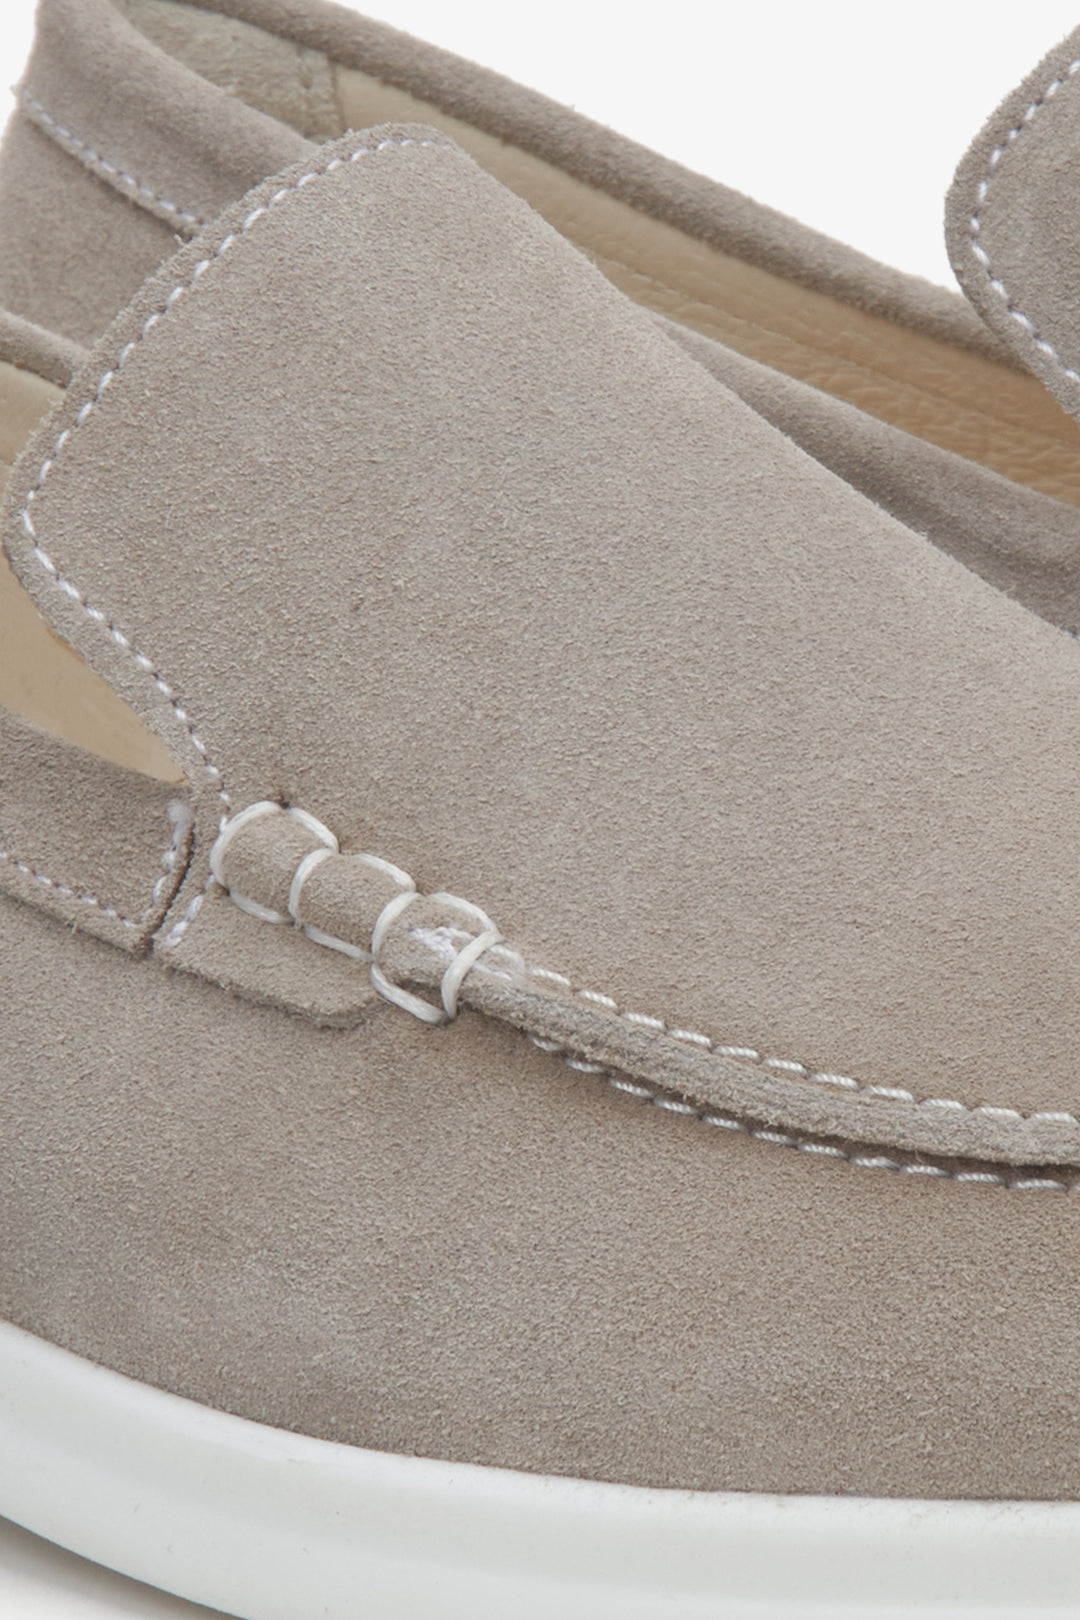 Women's dark grey suede Estro moccasins - close-up of the sewing system.